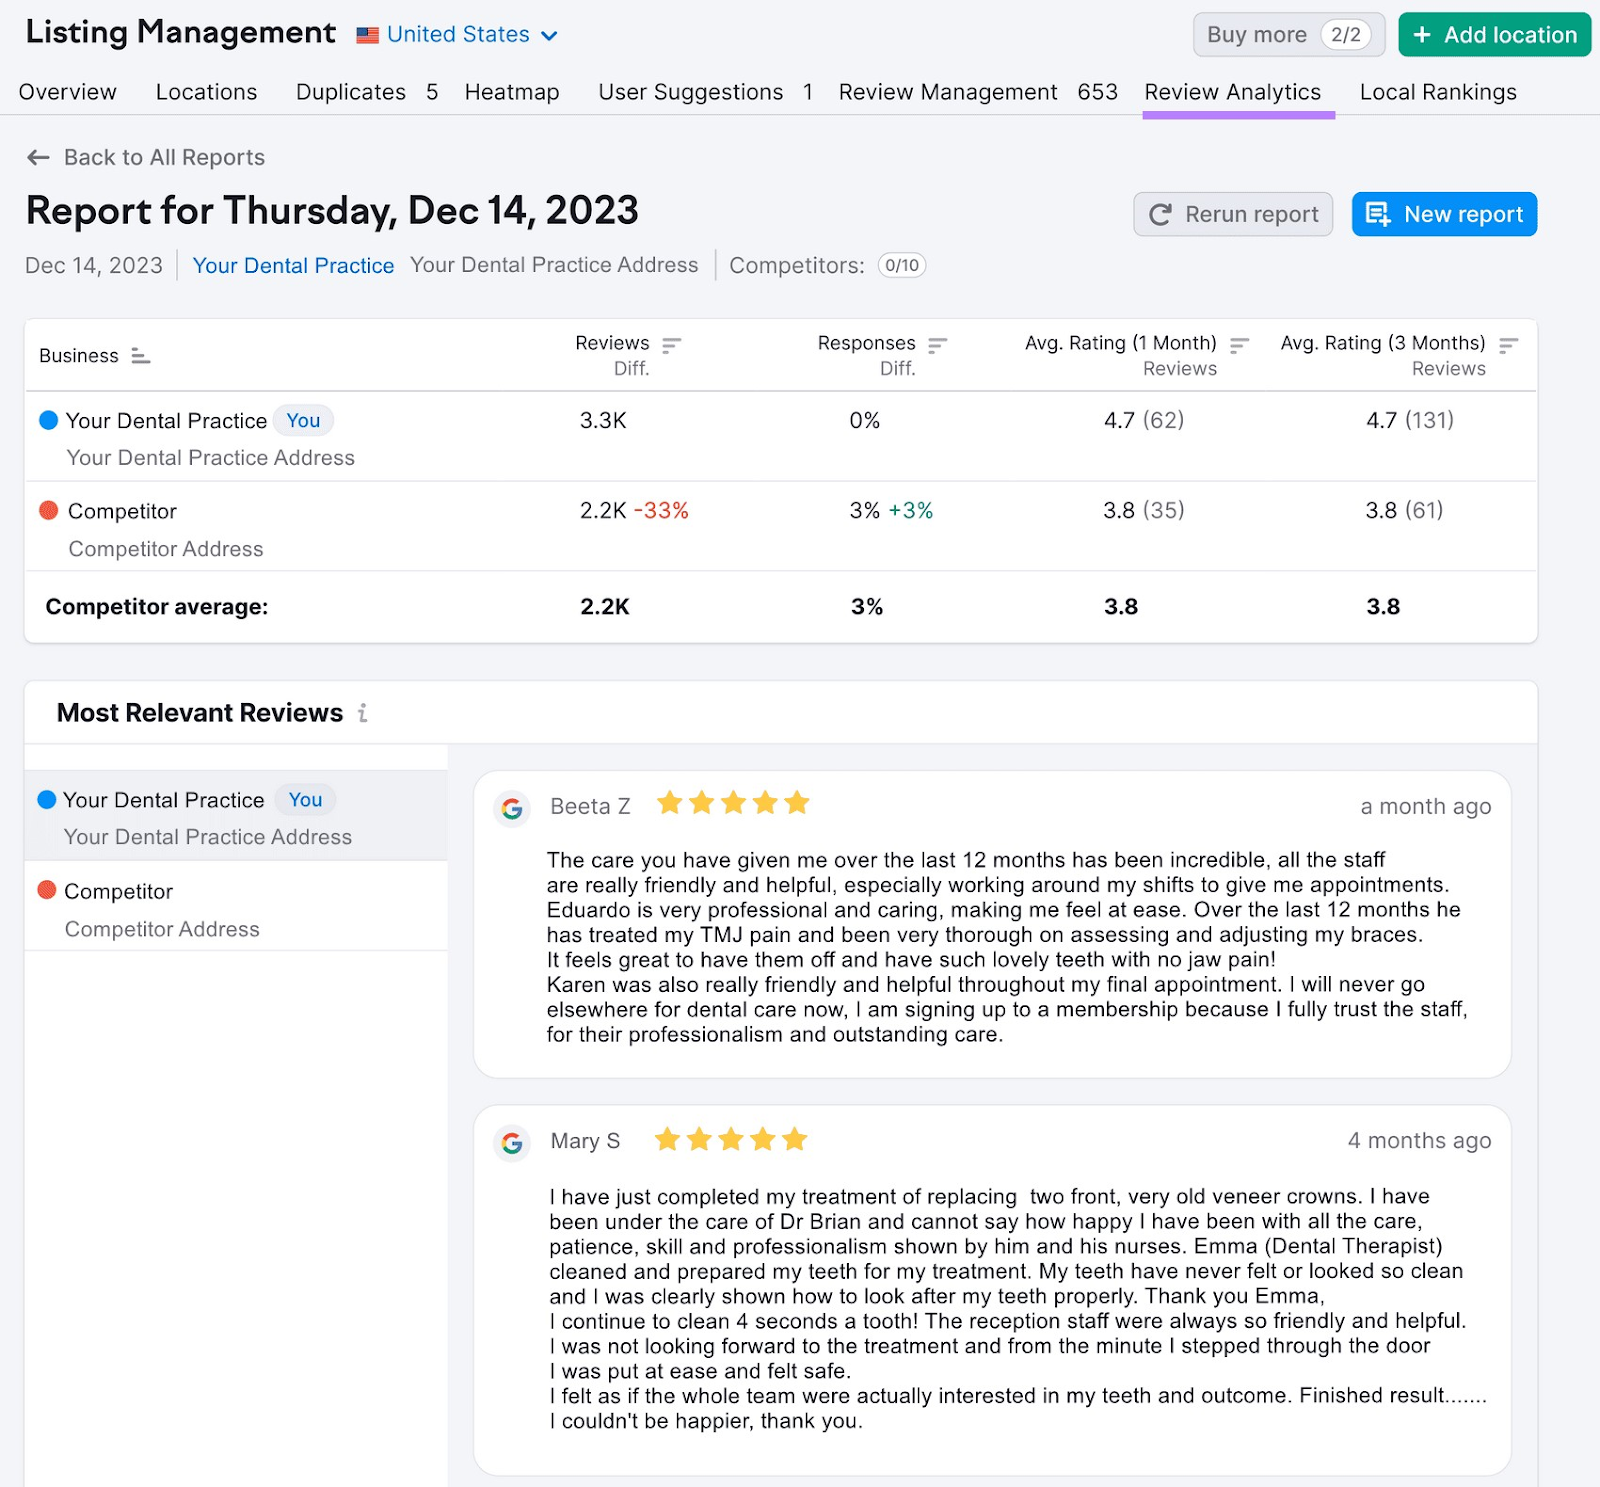 Review analytics report in Listing Management tool